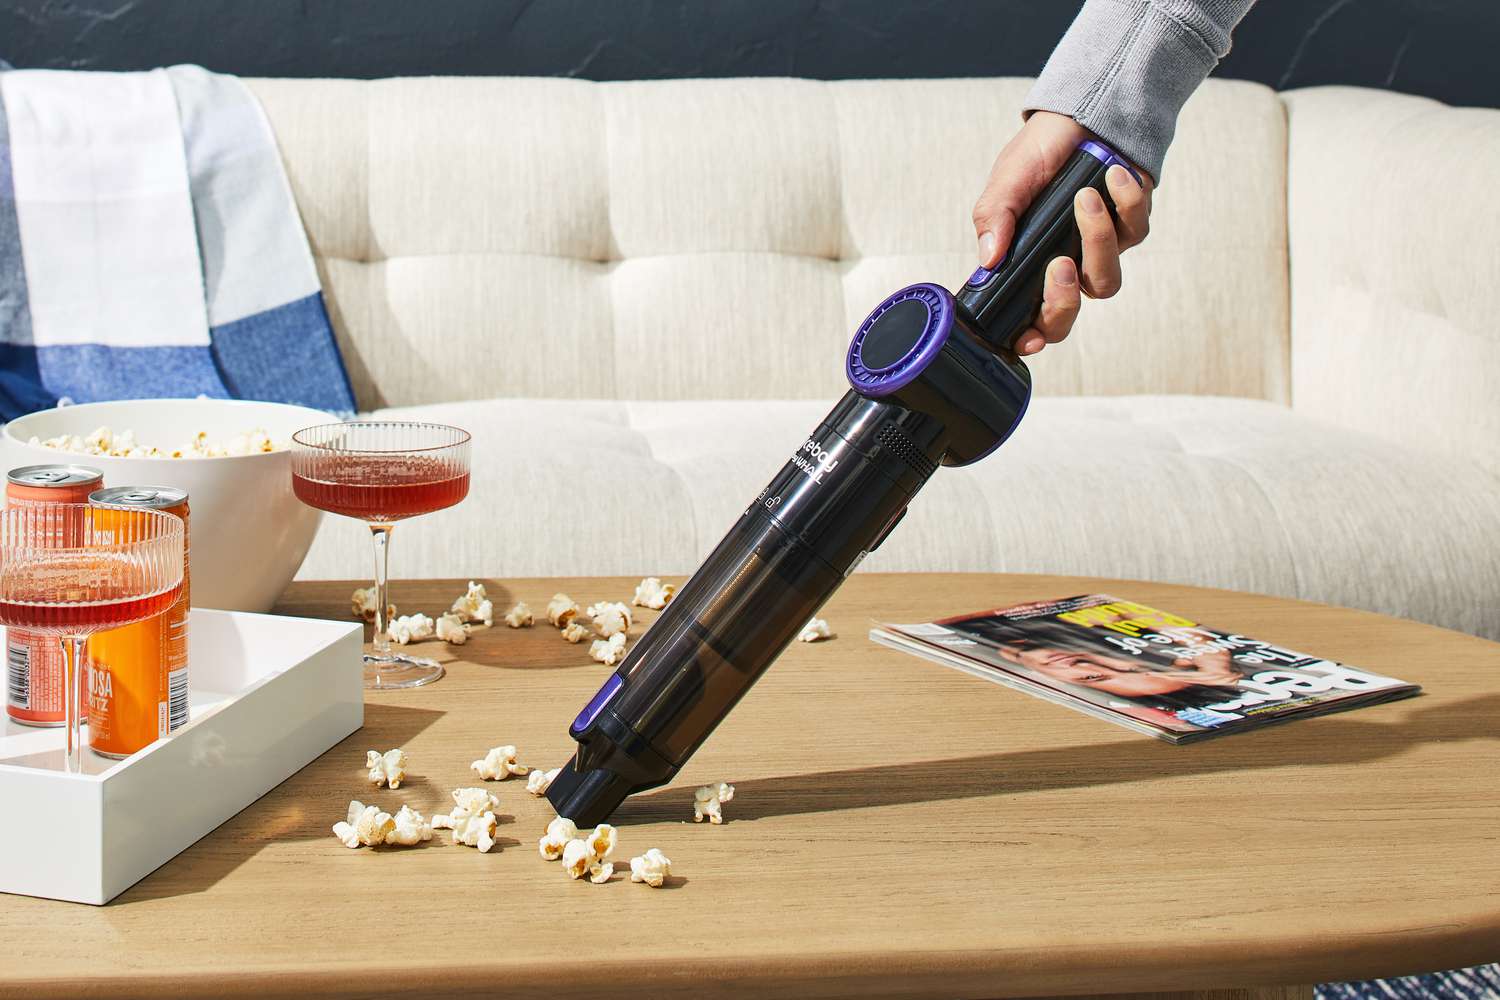 Person using Nicebay Handheld Cordless Vacuum to clean popcorn from table